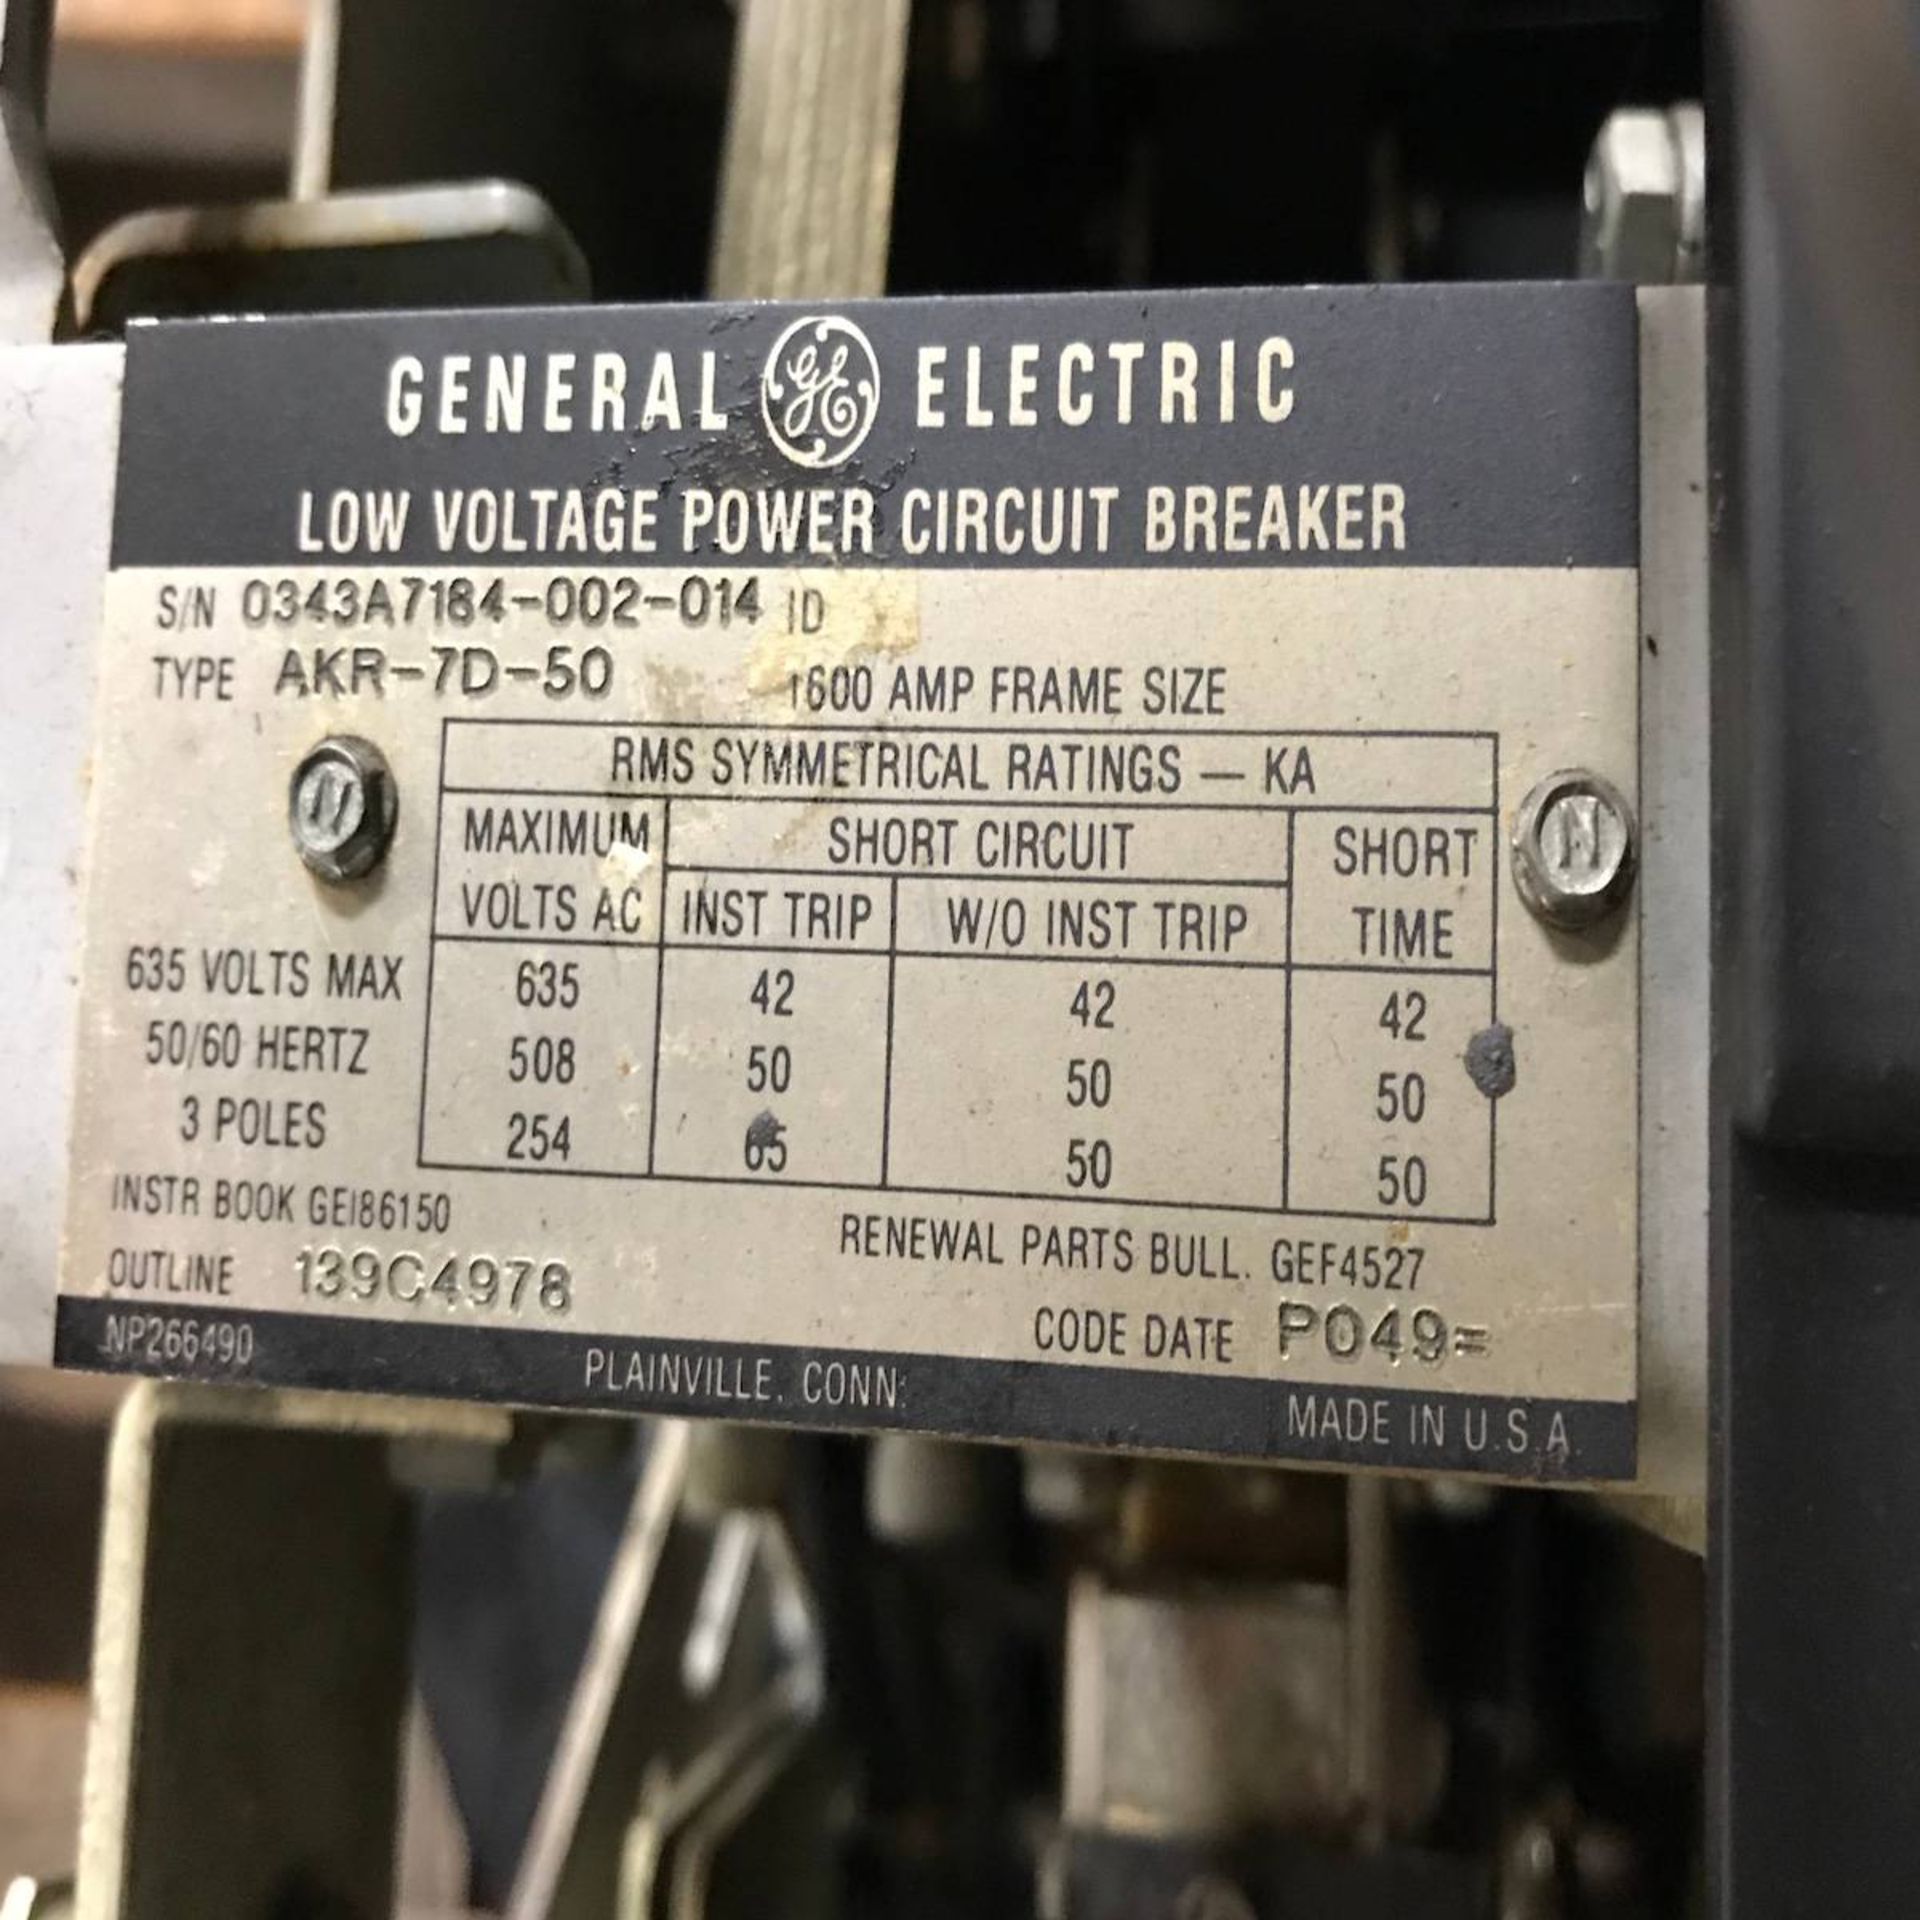 General Electric AKR-7D-75 Low Voltage Power Circuit Breaker - Image 4 of 5